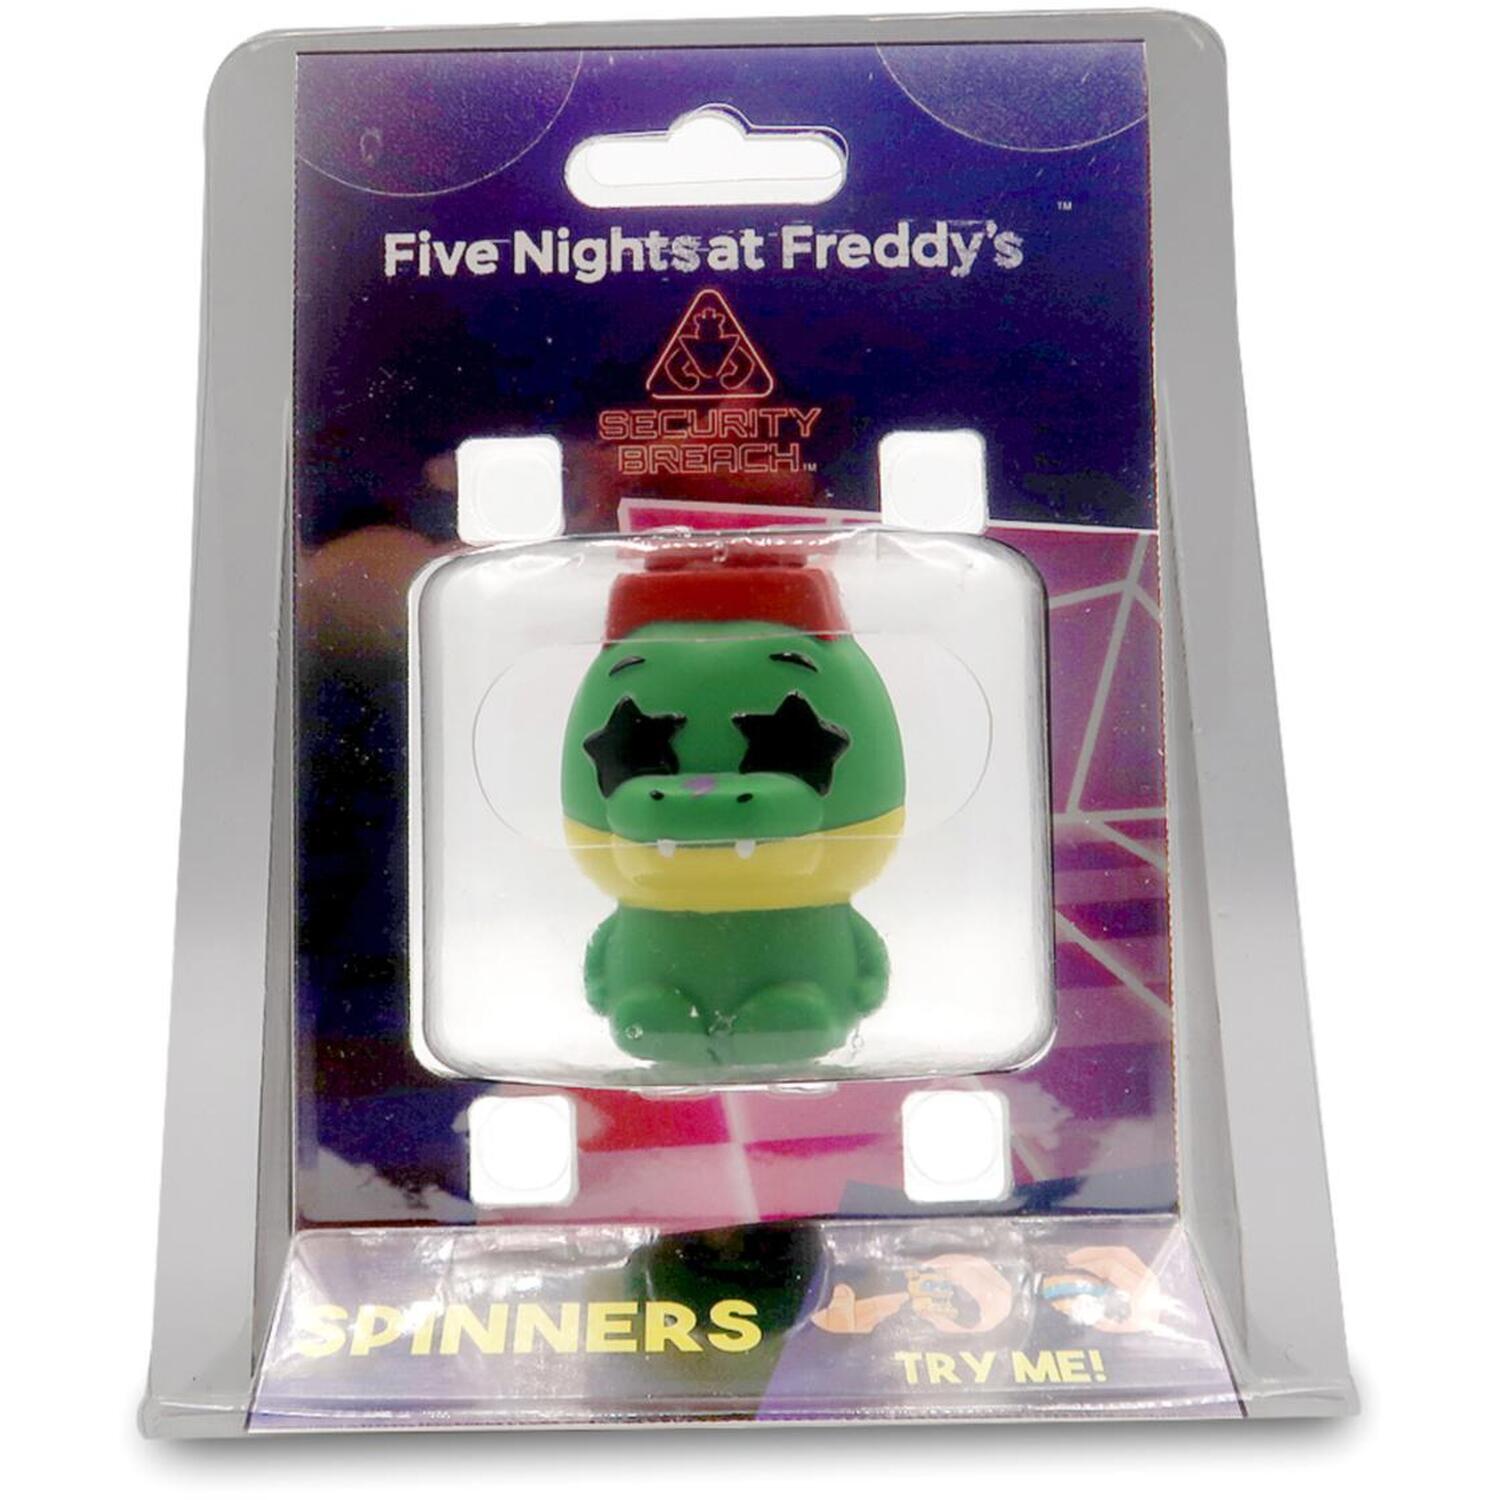 Five Nights at Freddy's Spinners Sensory Toy Image